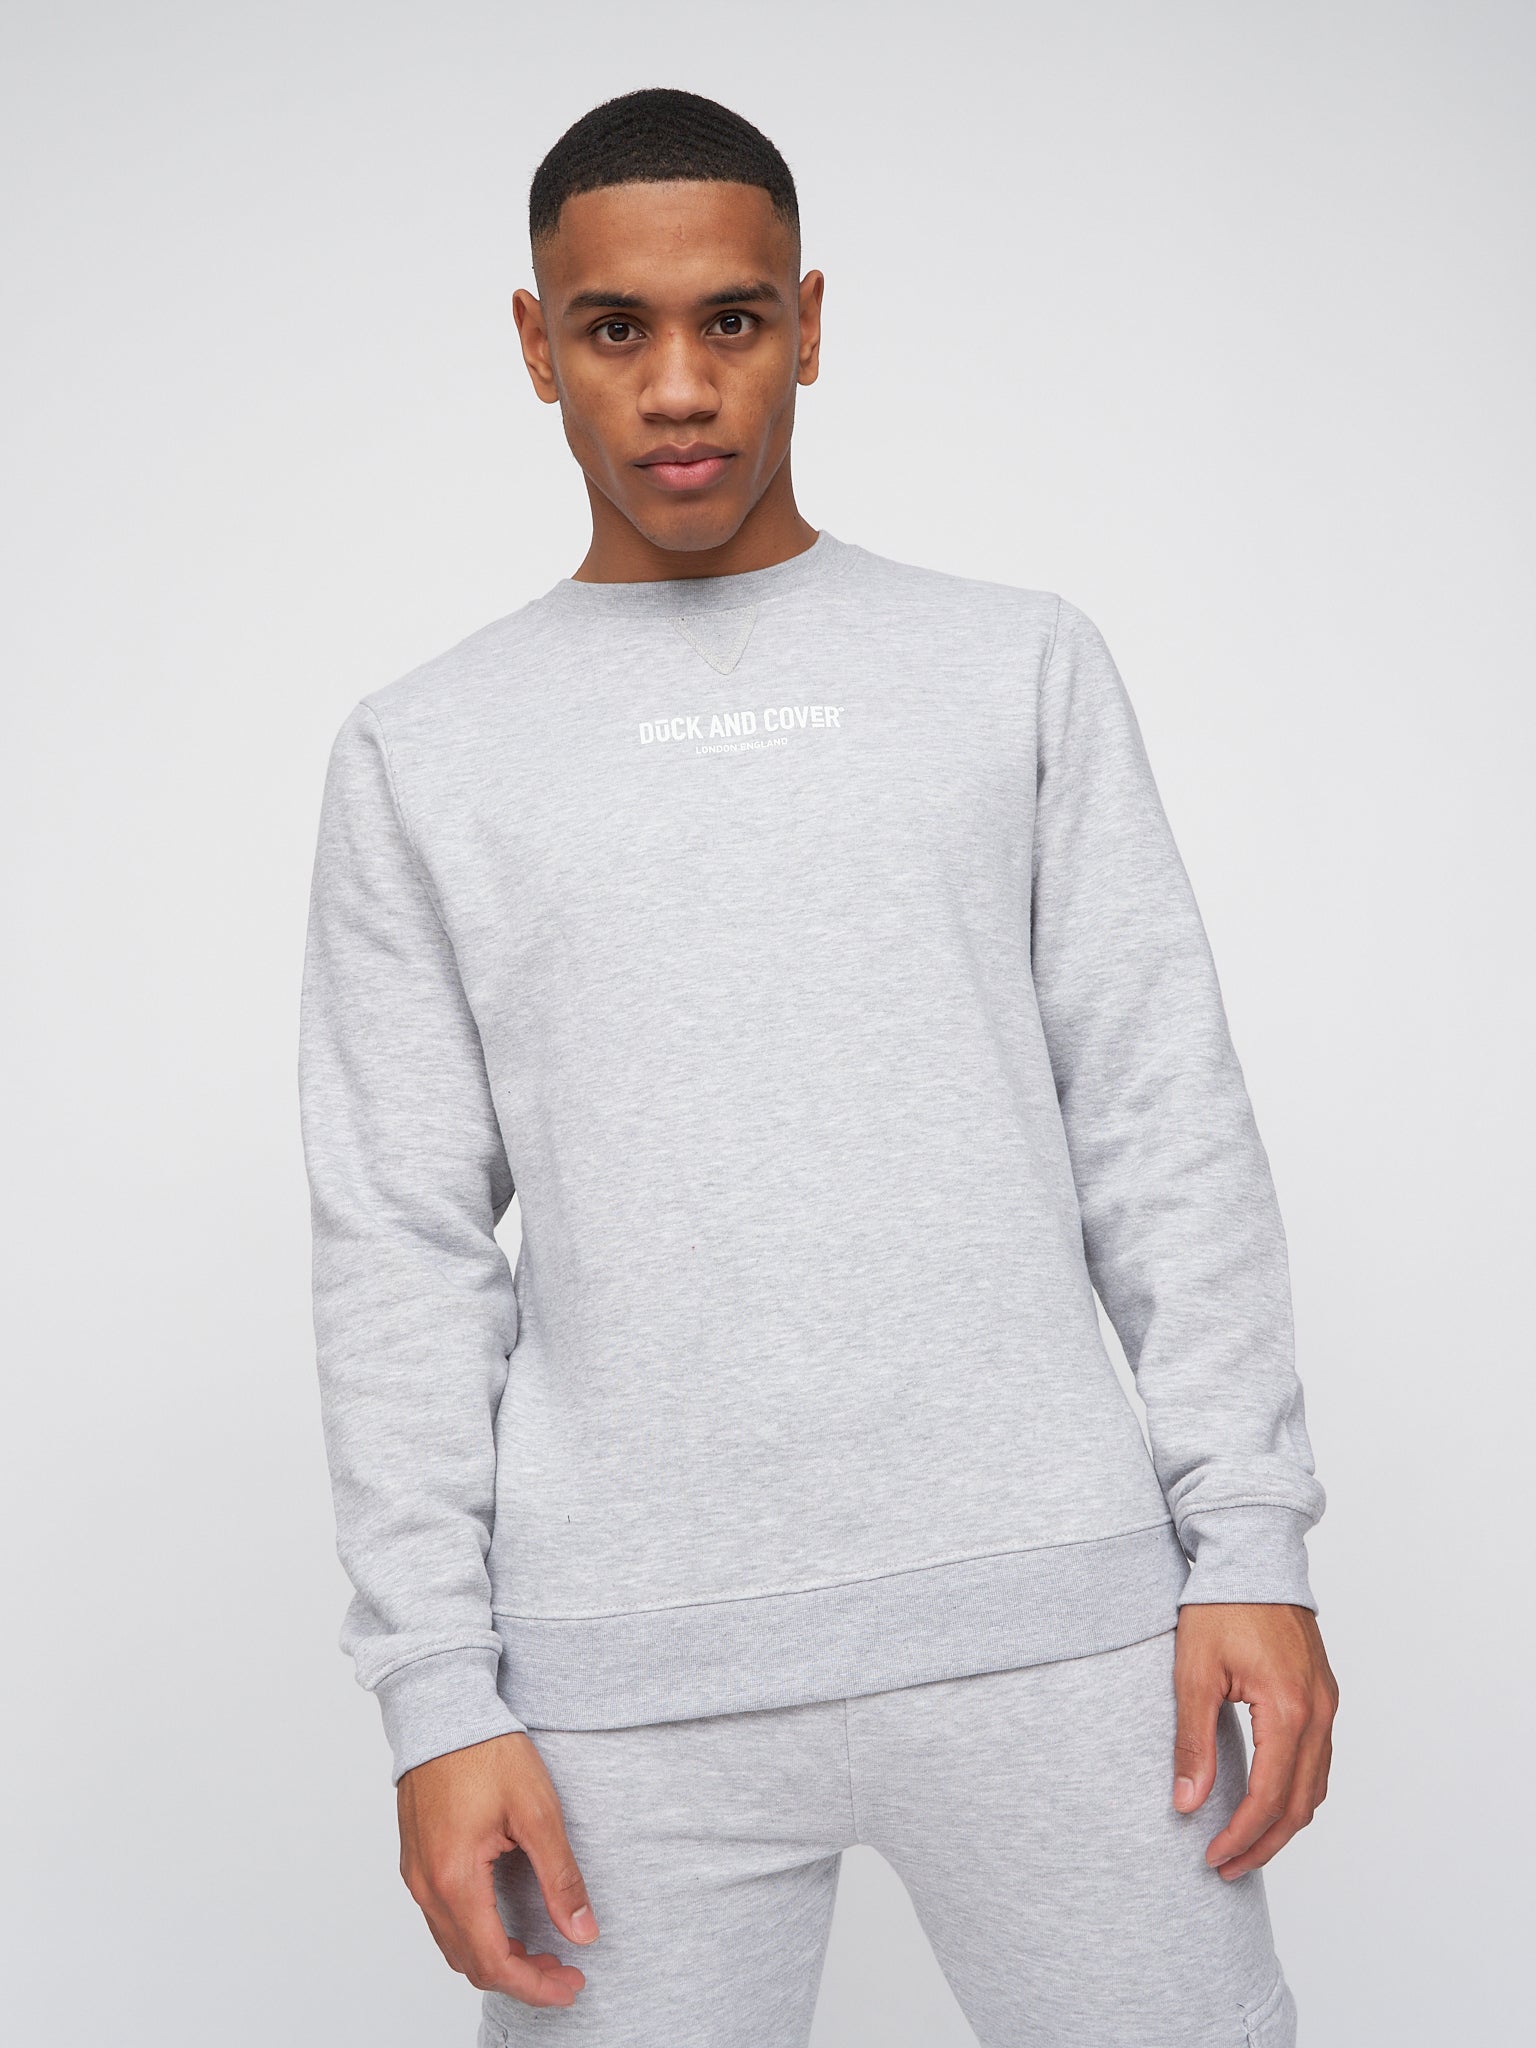 Melbray Crew Sweat & Jogger Set Grey Marl – Duck and Cover